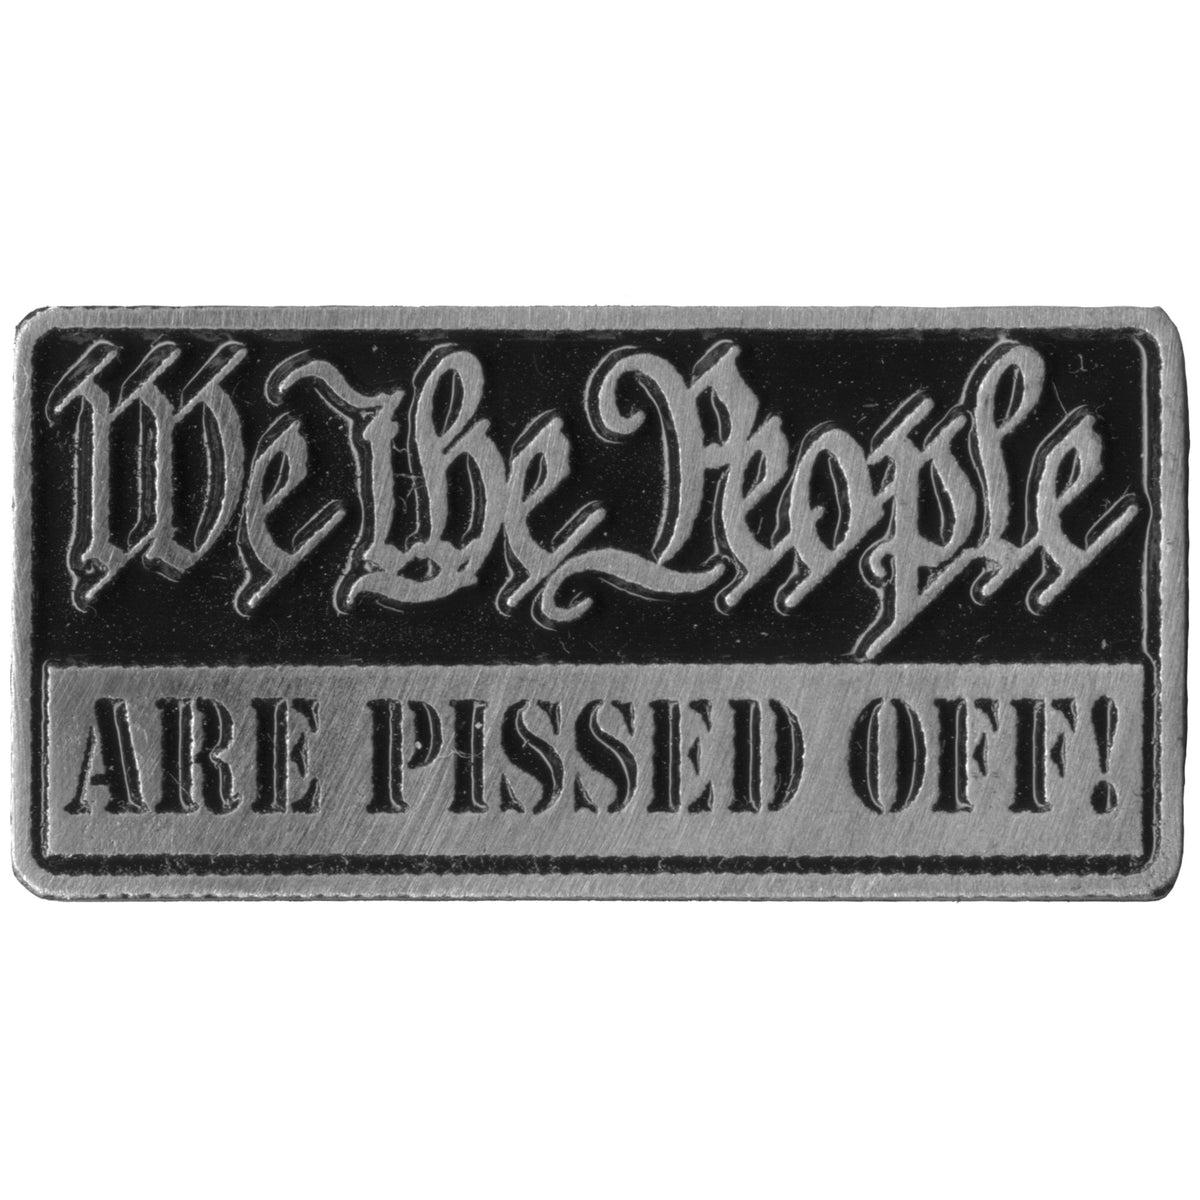 Hot Leathers We The People Are Pissed Off Pin